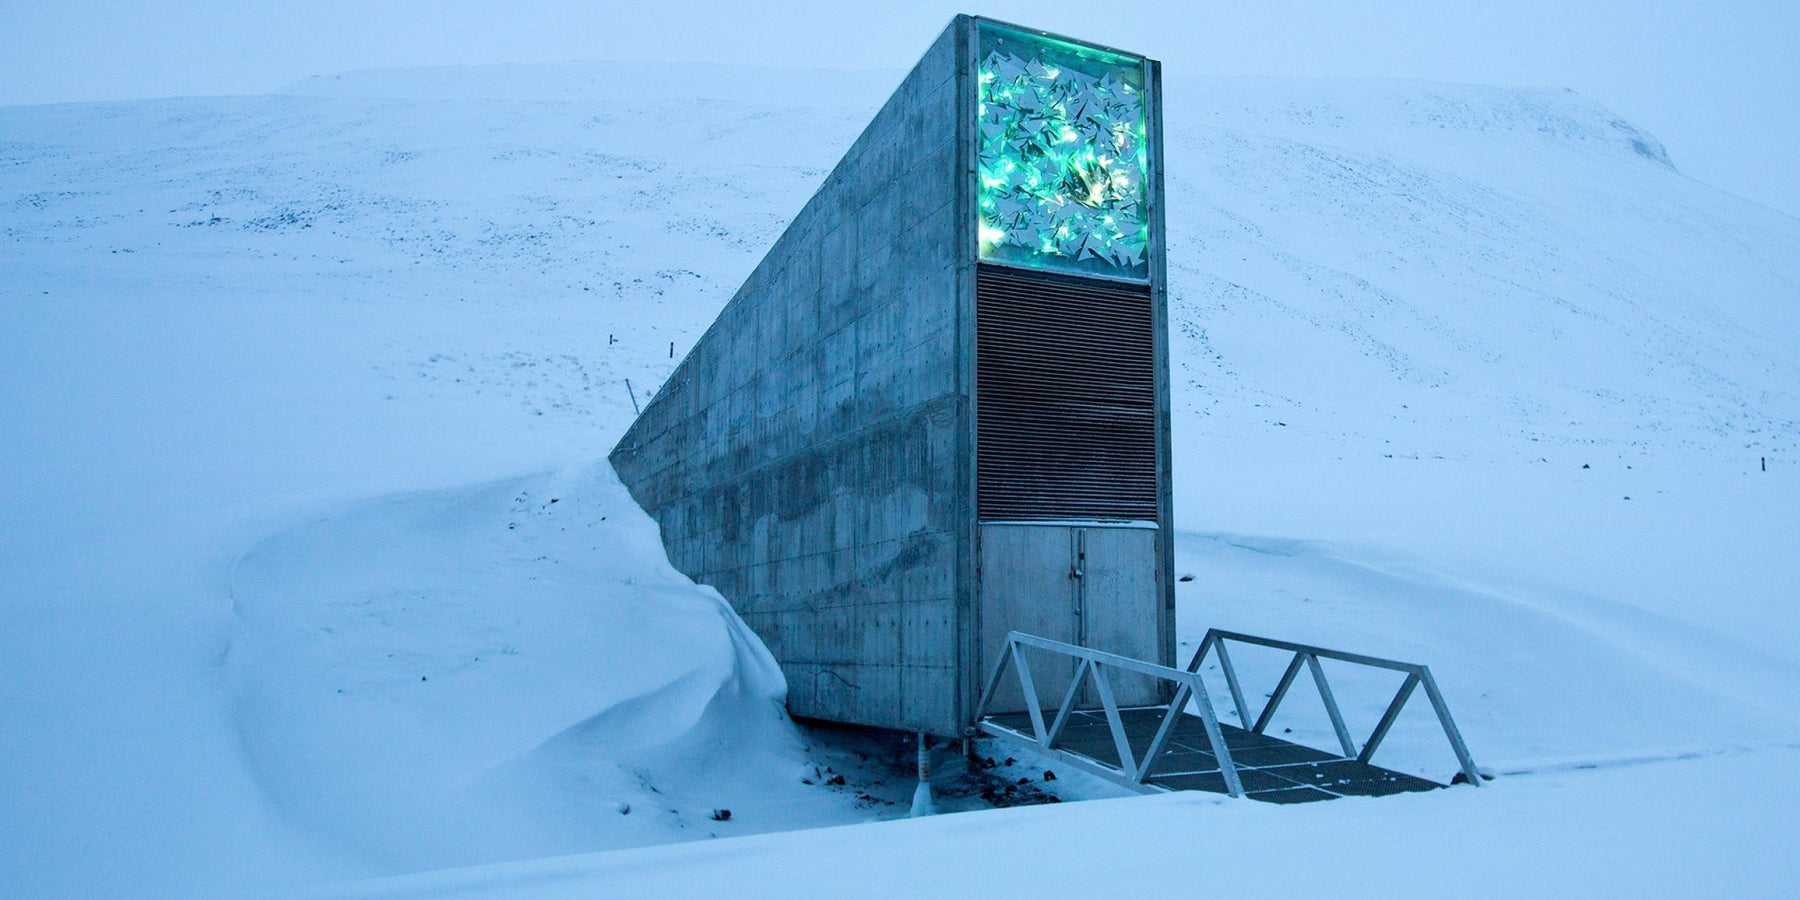 The US Government's TOP SECRET Emergency Food Supply: What Is the Arctic Seed Vault? - The Survival Prep Store